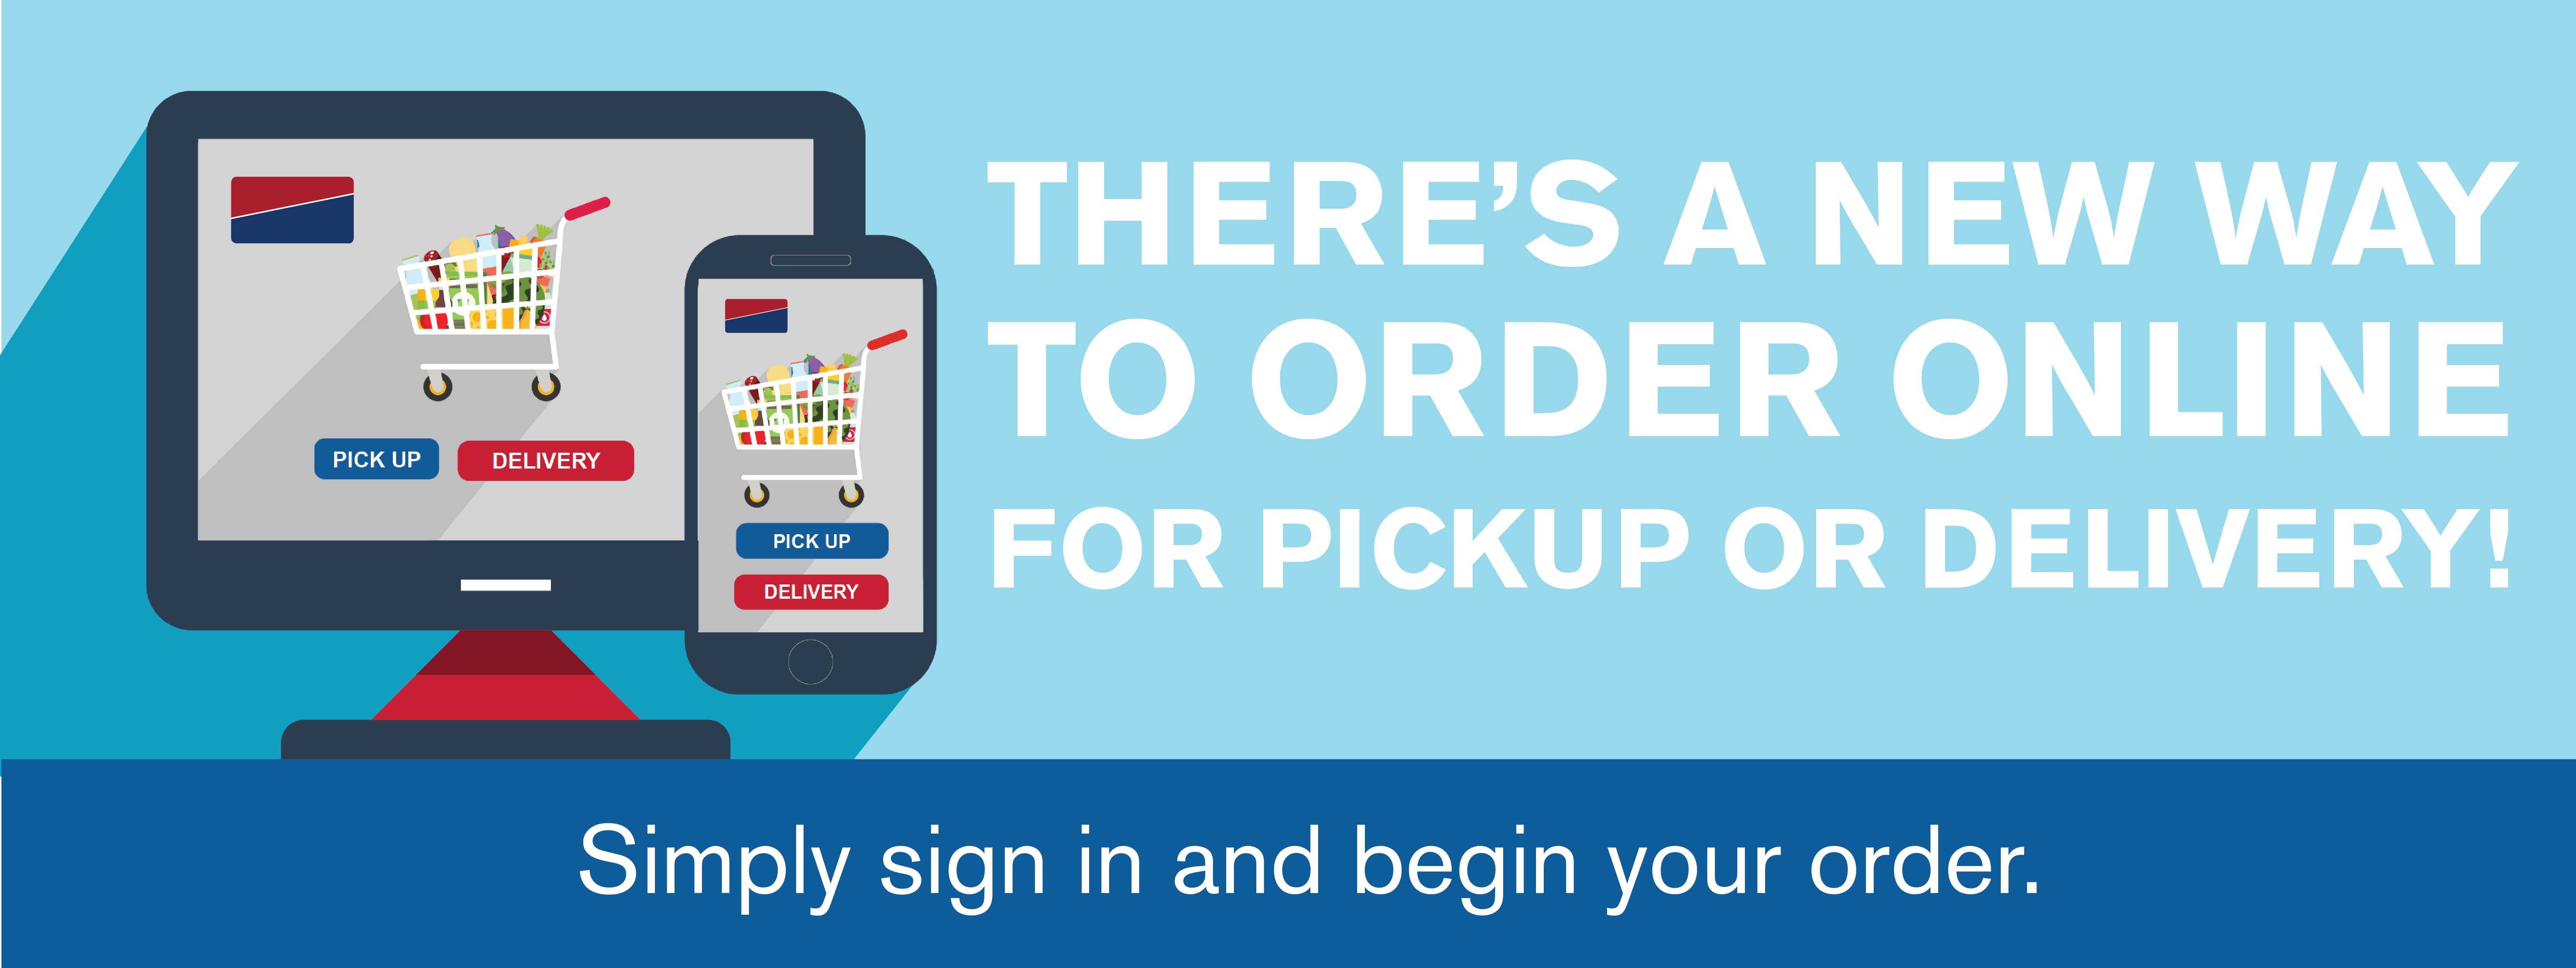 There's a new way to order online for pickup or delivery!